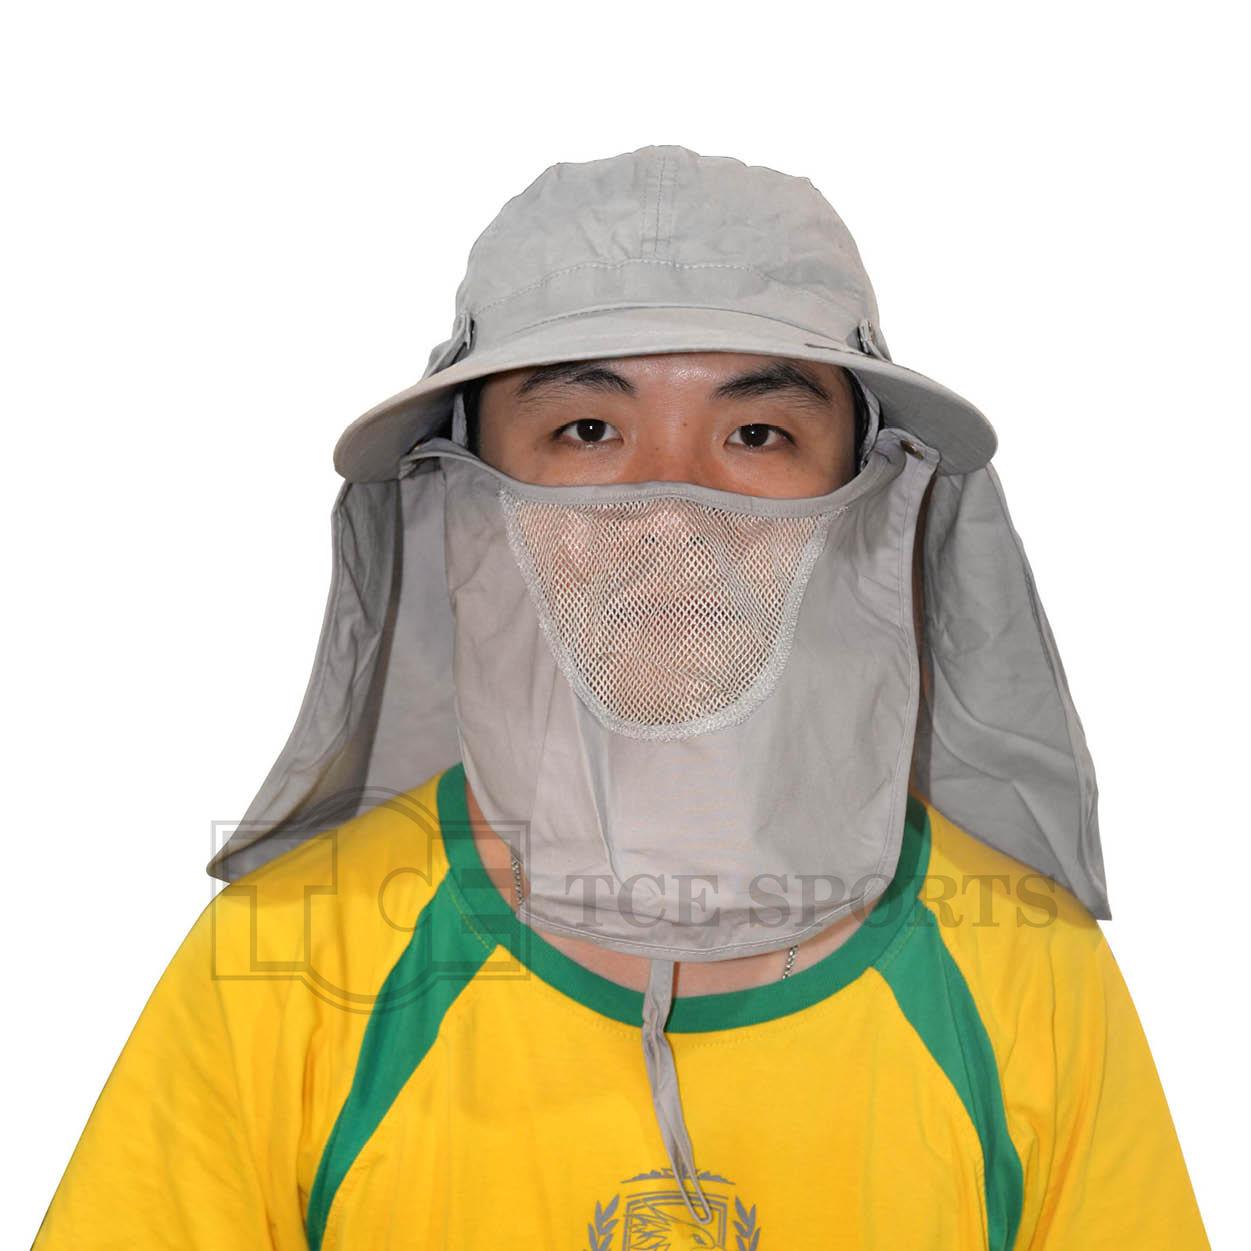 Seahawk - Fishing Cap With Face Cover - JFC02 Main